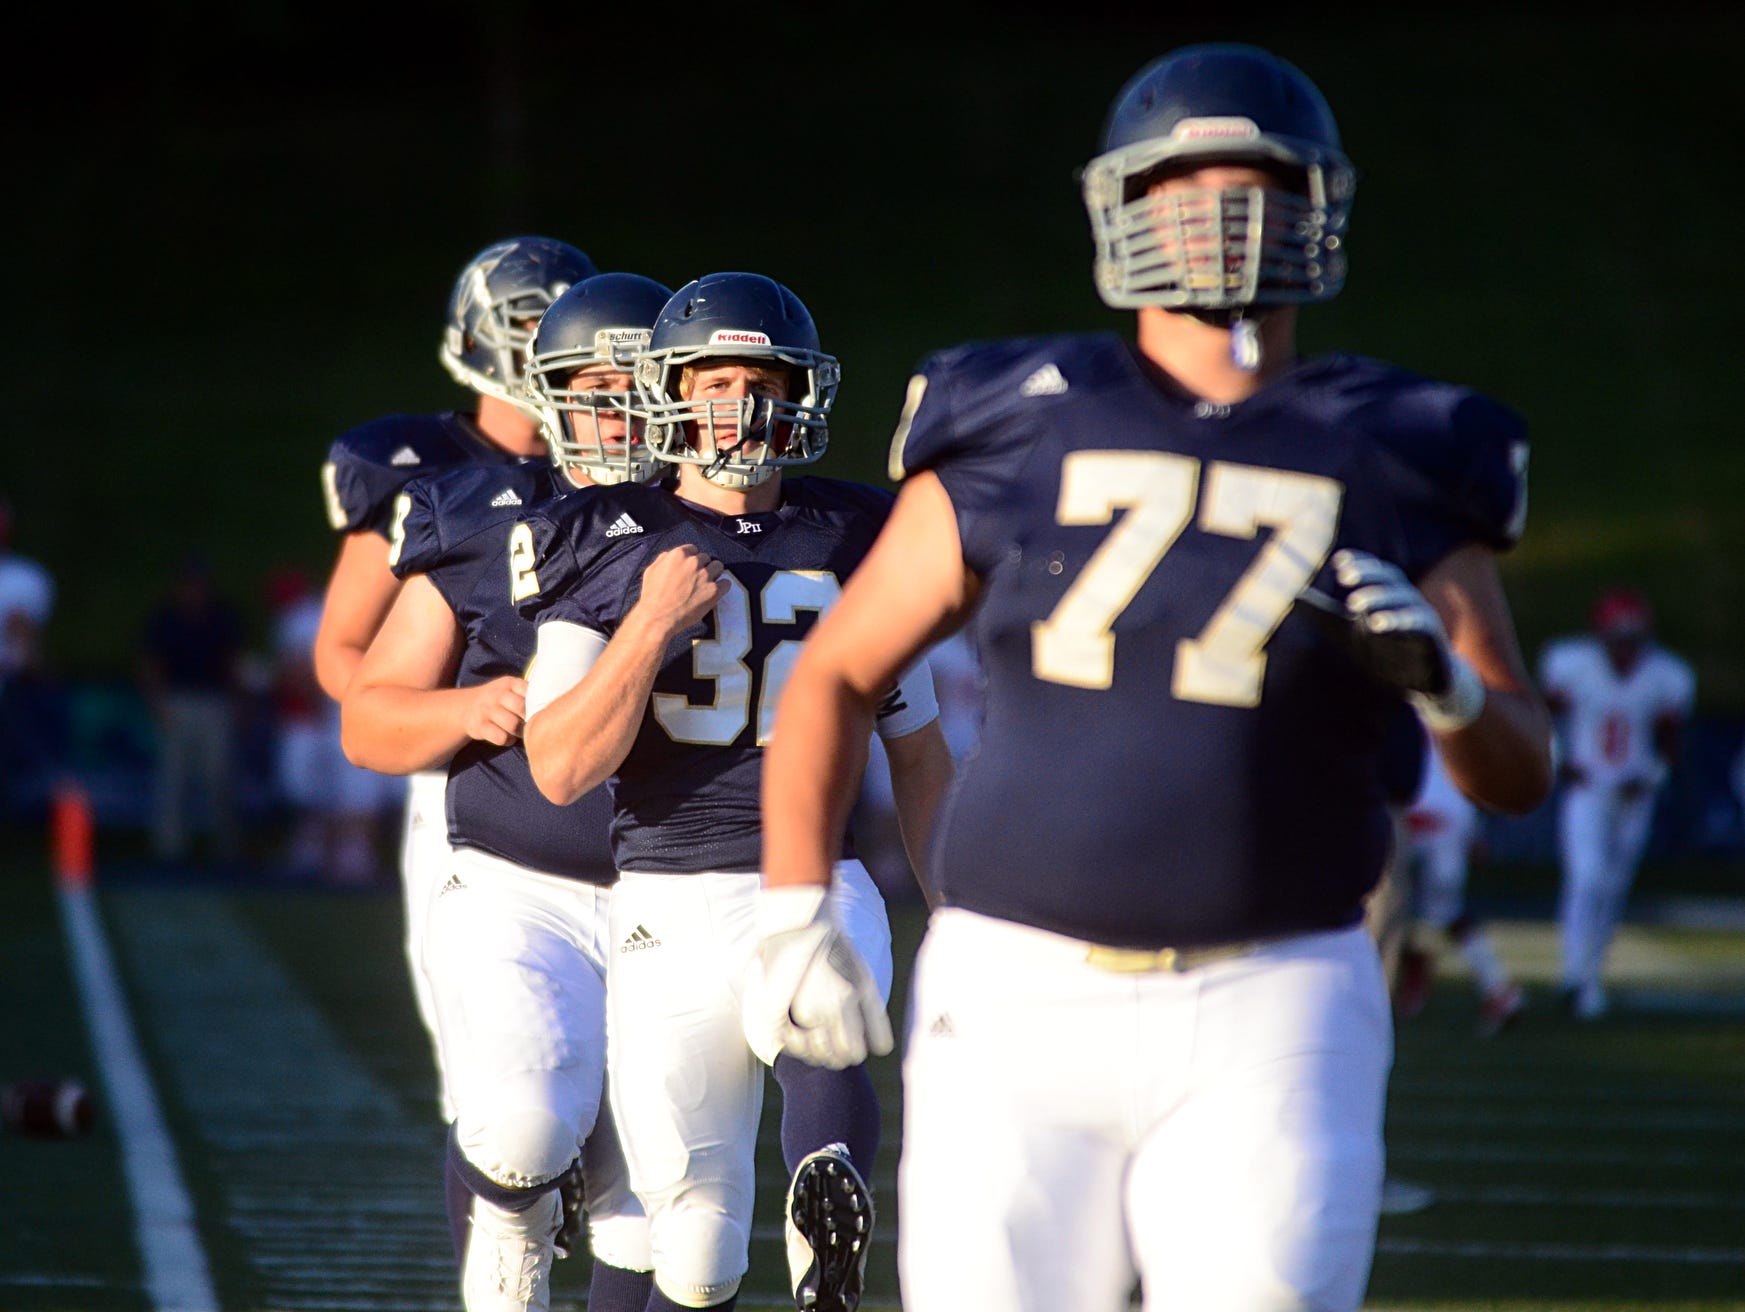 Pope John Paul II players Jake Motz (77), Drew Bledsoe (32) and Daniel Leonard go through pregame stretches prior to a game earlier this season. The Knights, fresh off their first-ever victory over Baylor, host McCallie on Friday.